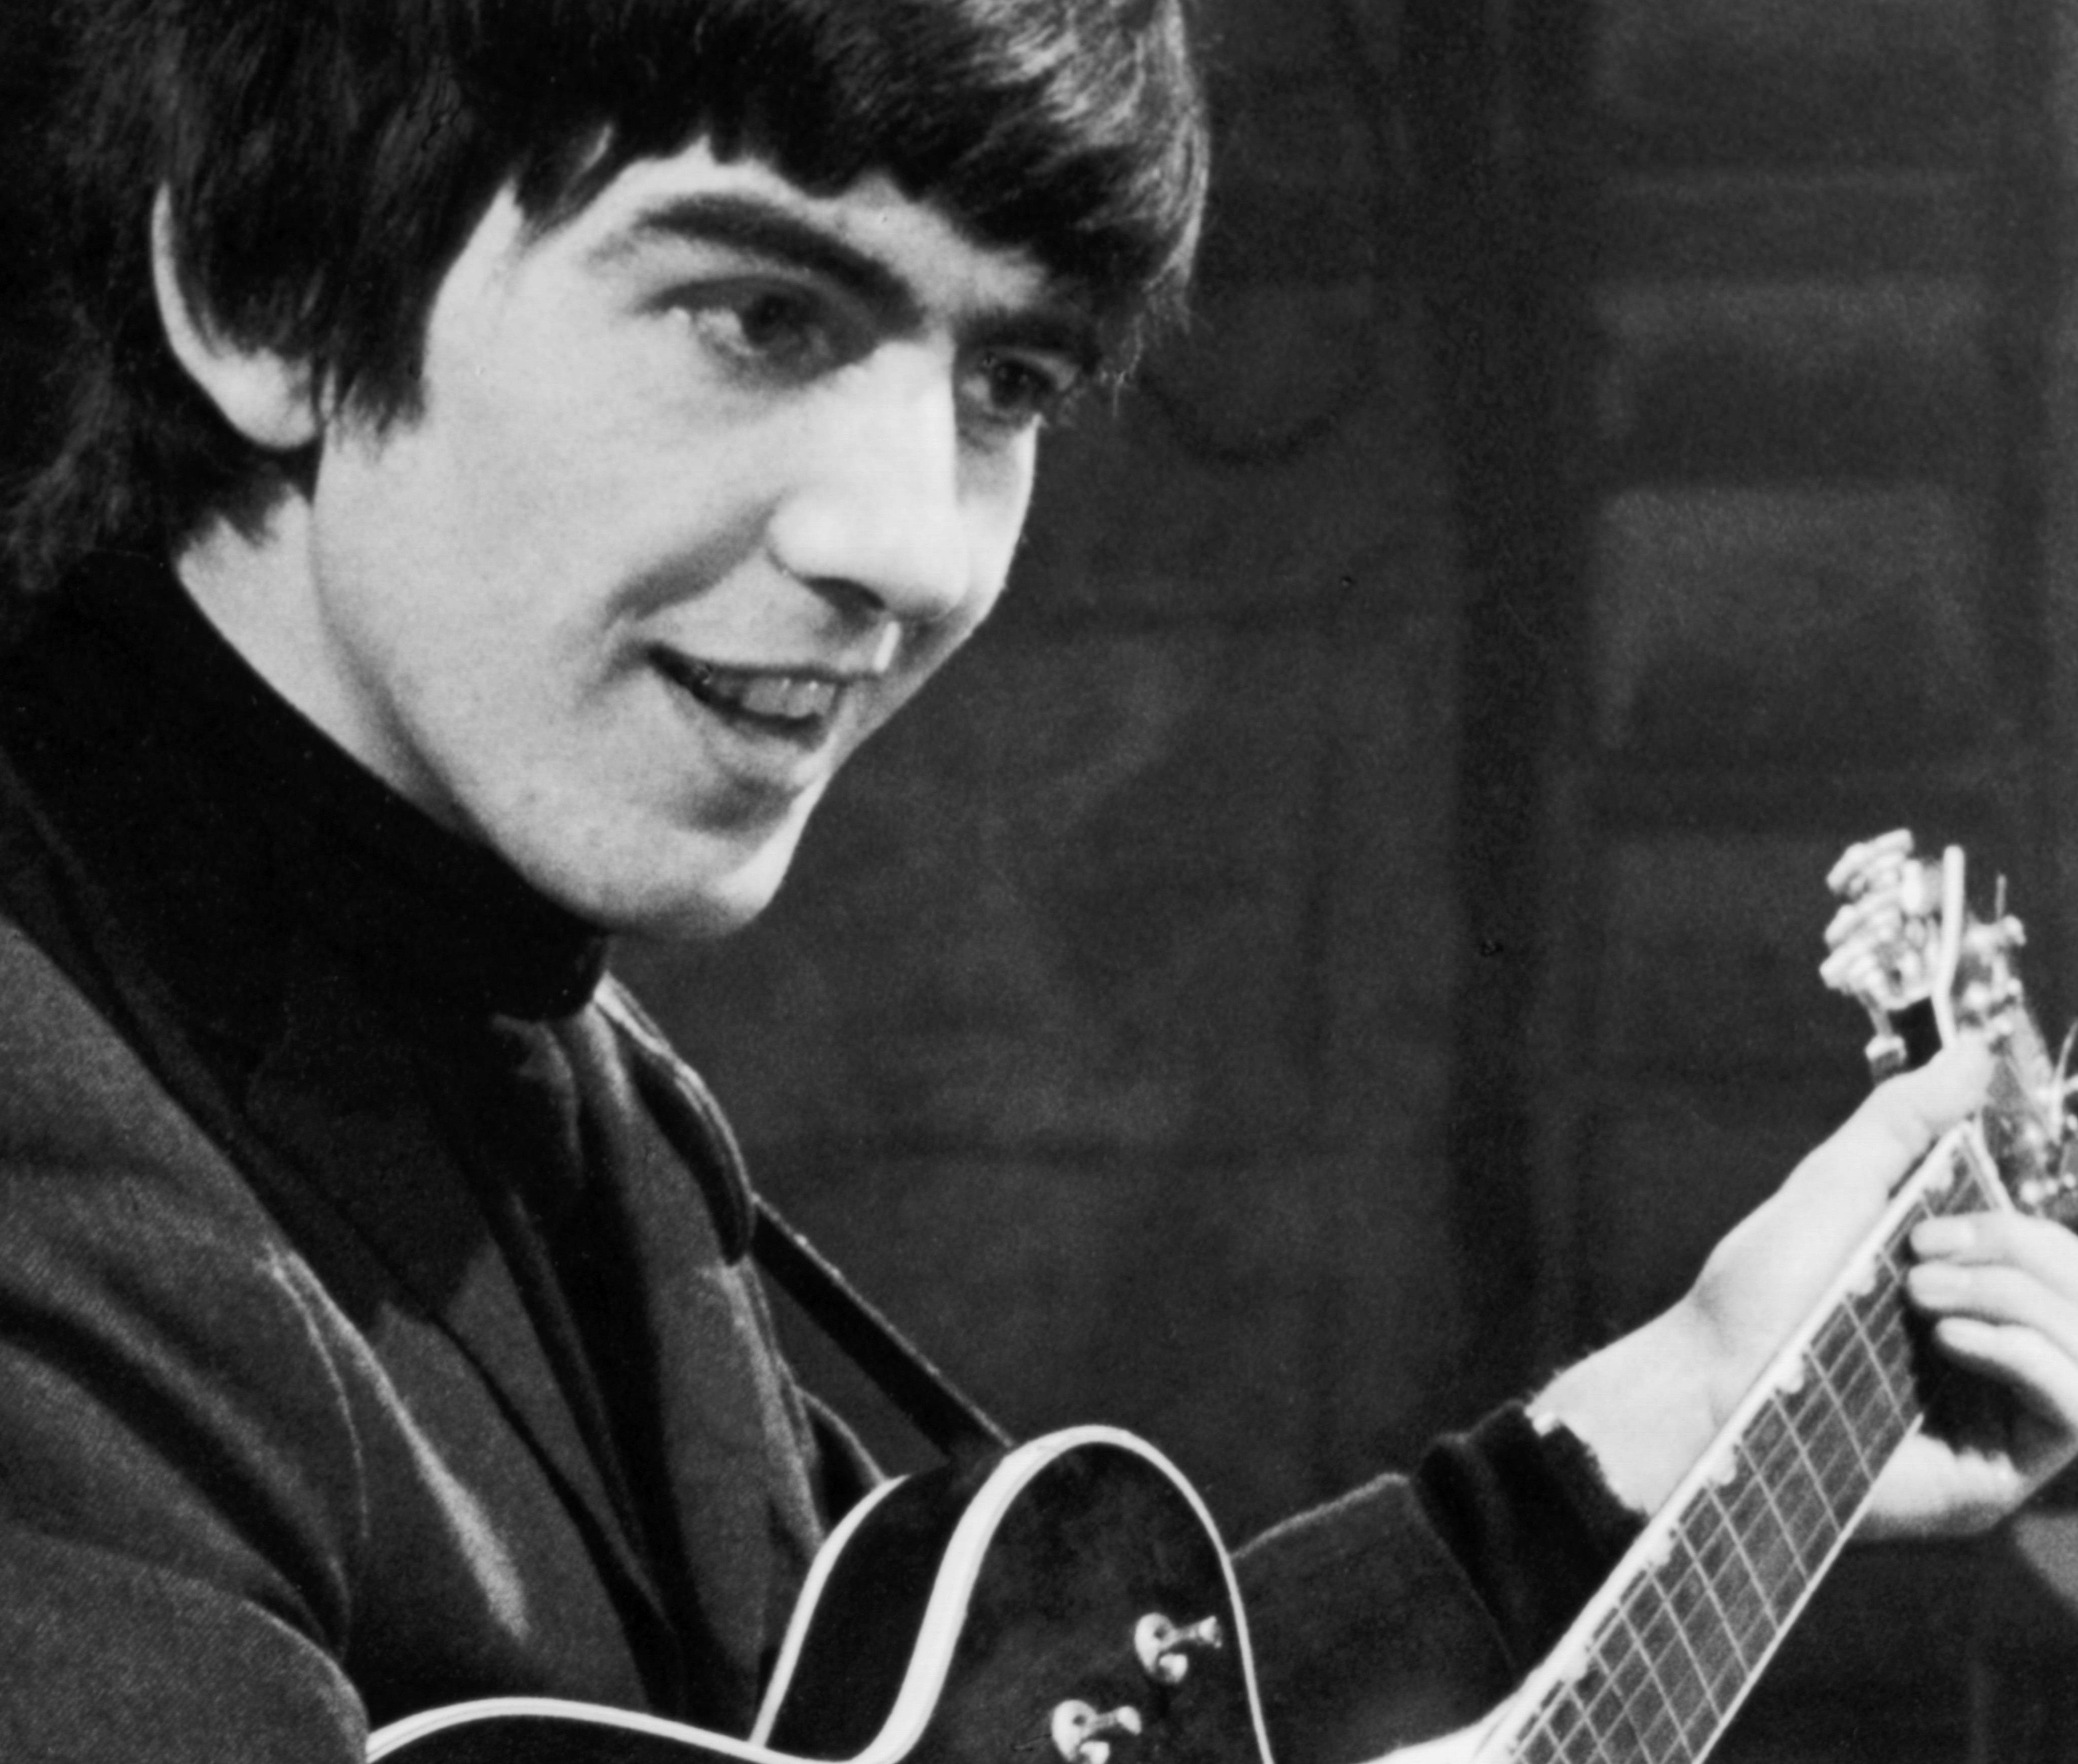 George Harrison holding a guitar during The Beatles' "We Can Work It Out" era